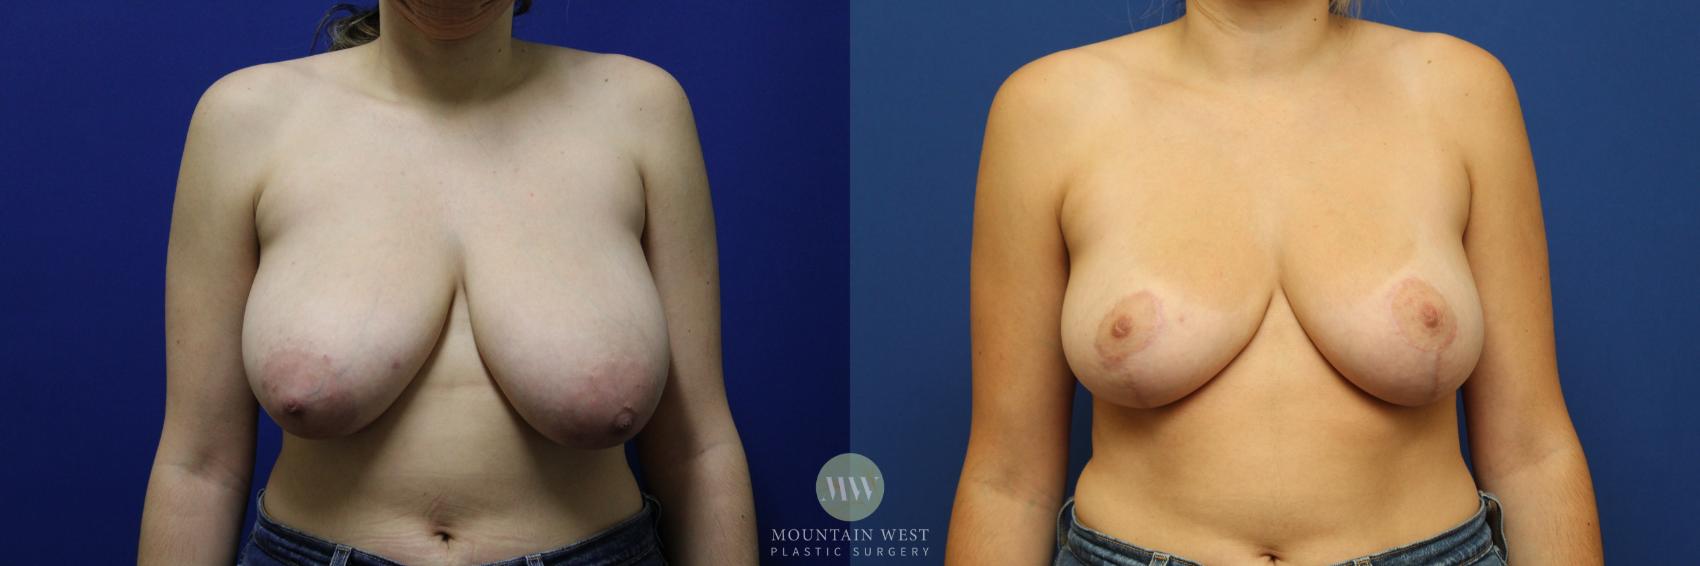 Breast Reduction, Before and 6 Months Postop, 1 pound reduction each side 